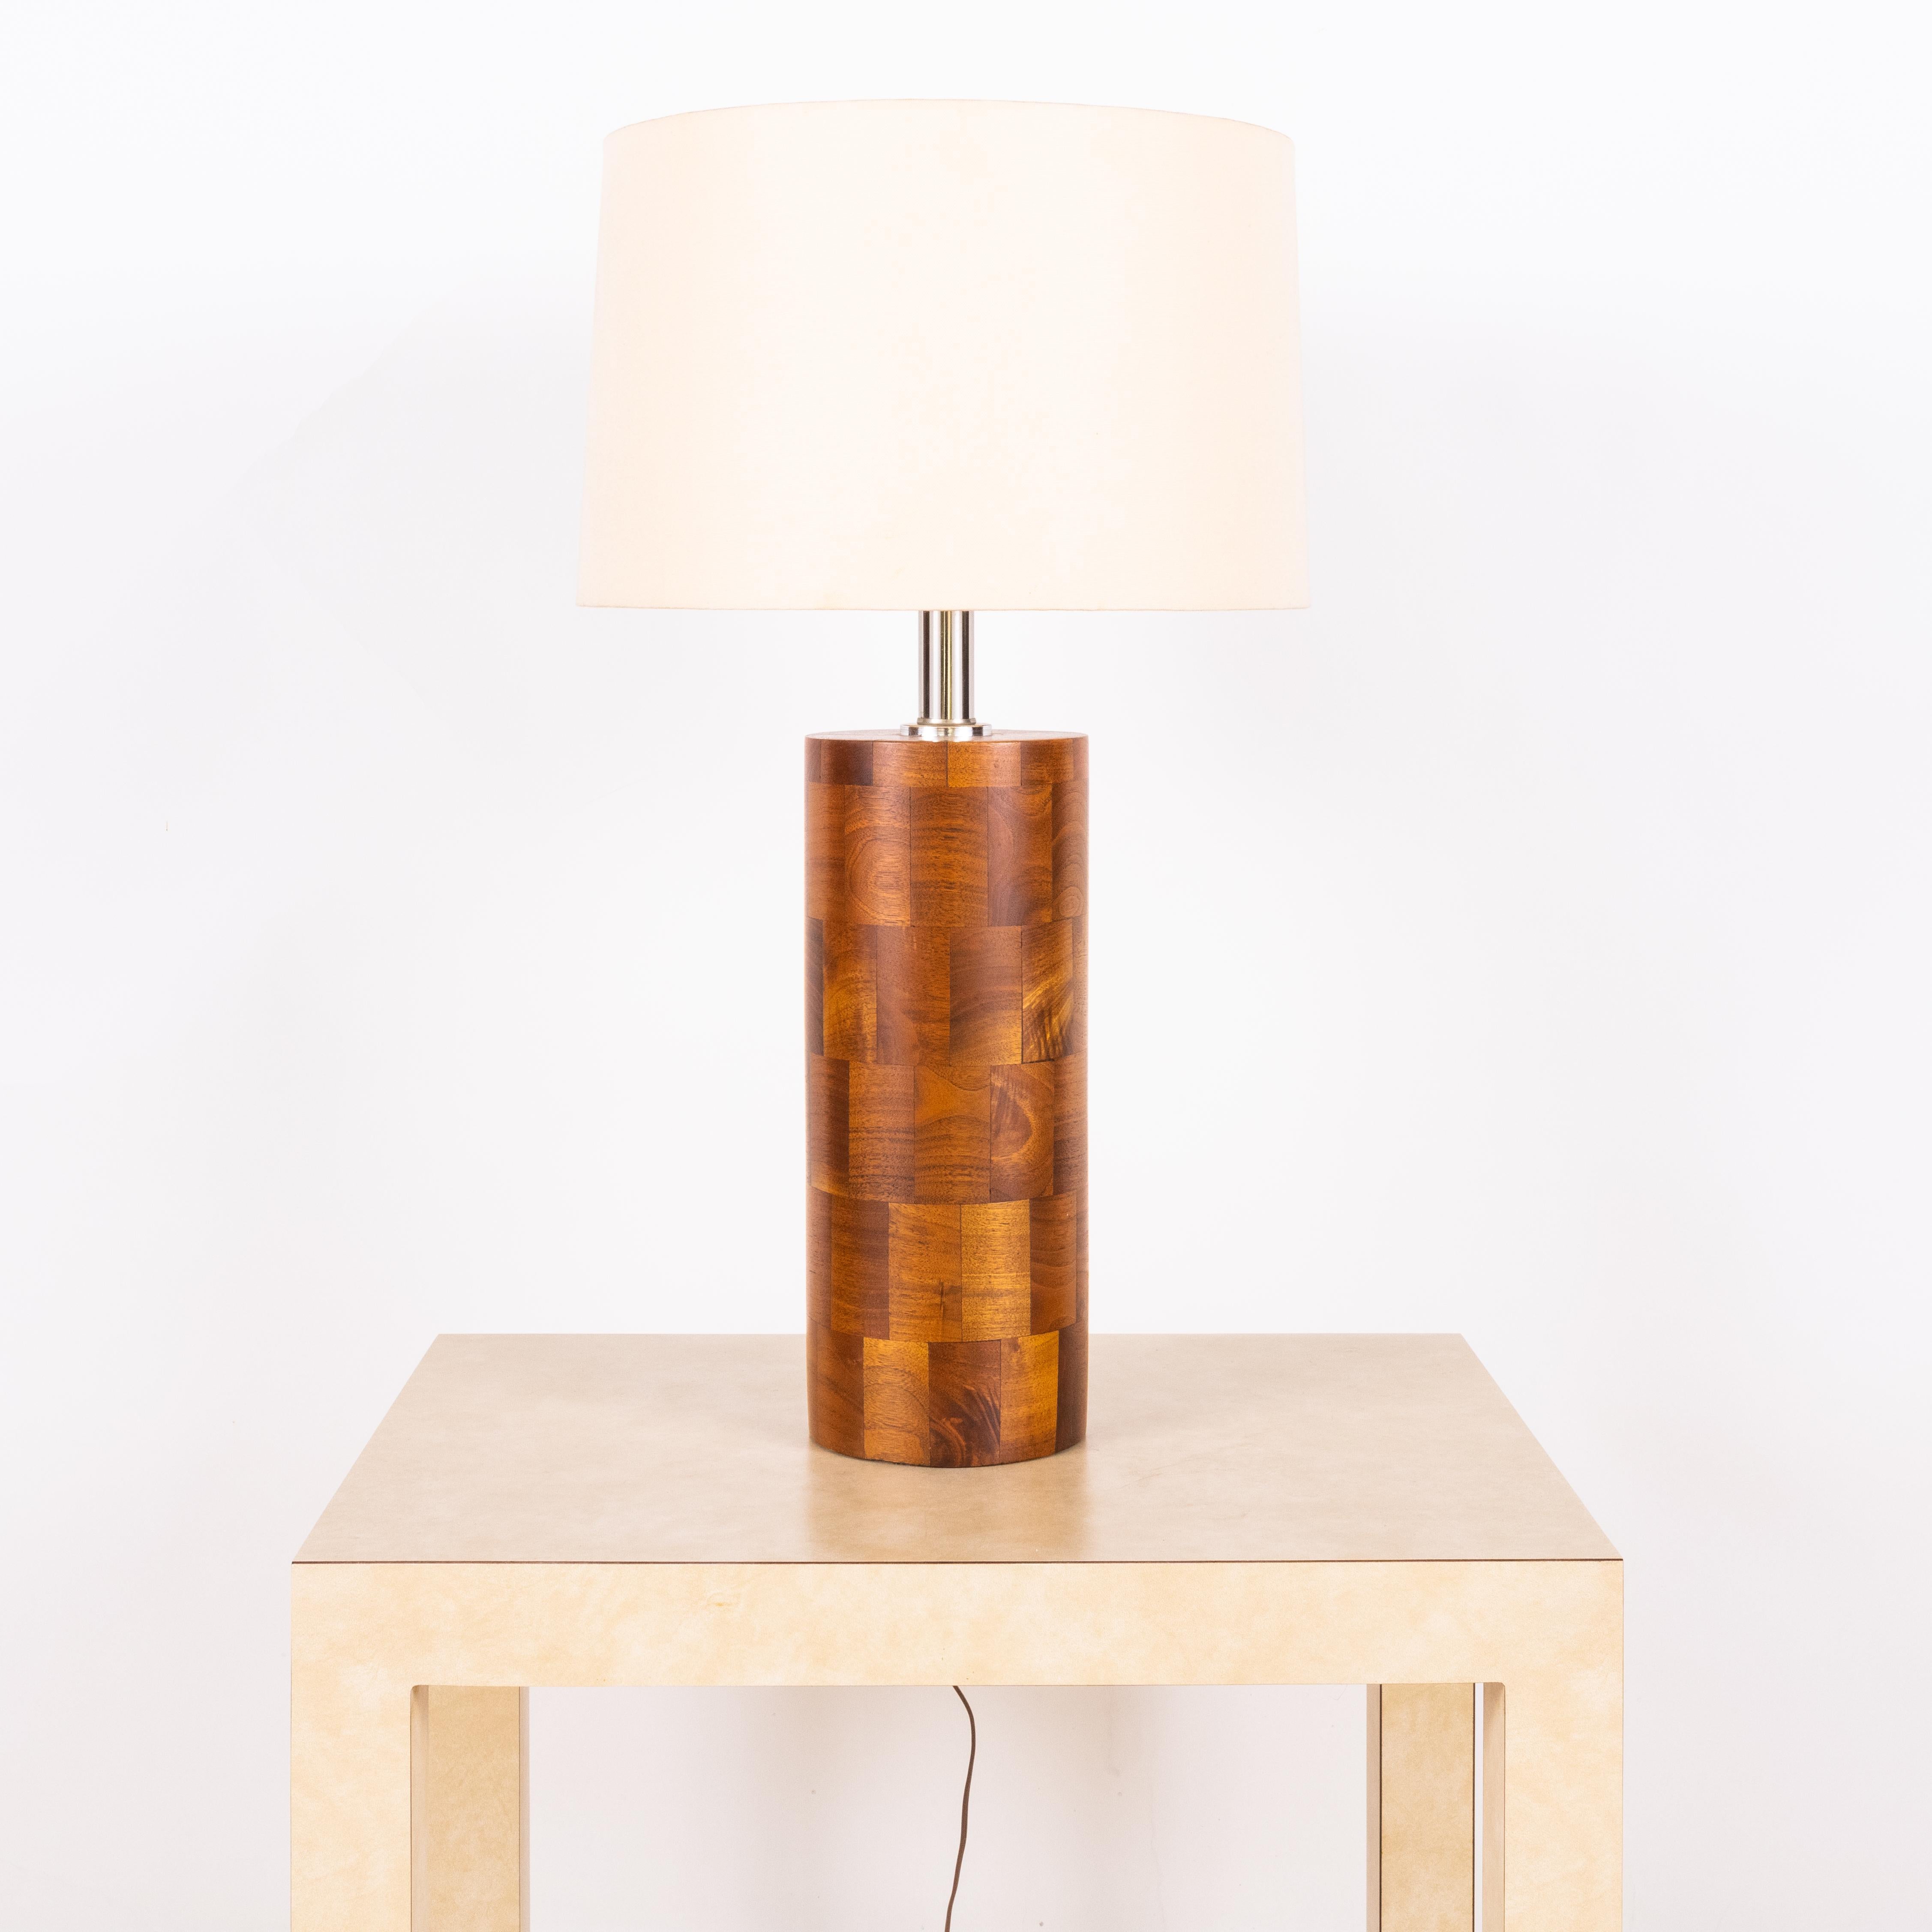 Tall wood block column lamp with linen shade by Amter Craft.

Dimensions listed (16 in. diameter x 29 in. tall) are the overall dimensions of the lamp with the shade, with the base 19 in. tall and the shade 10 in. tall.